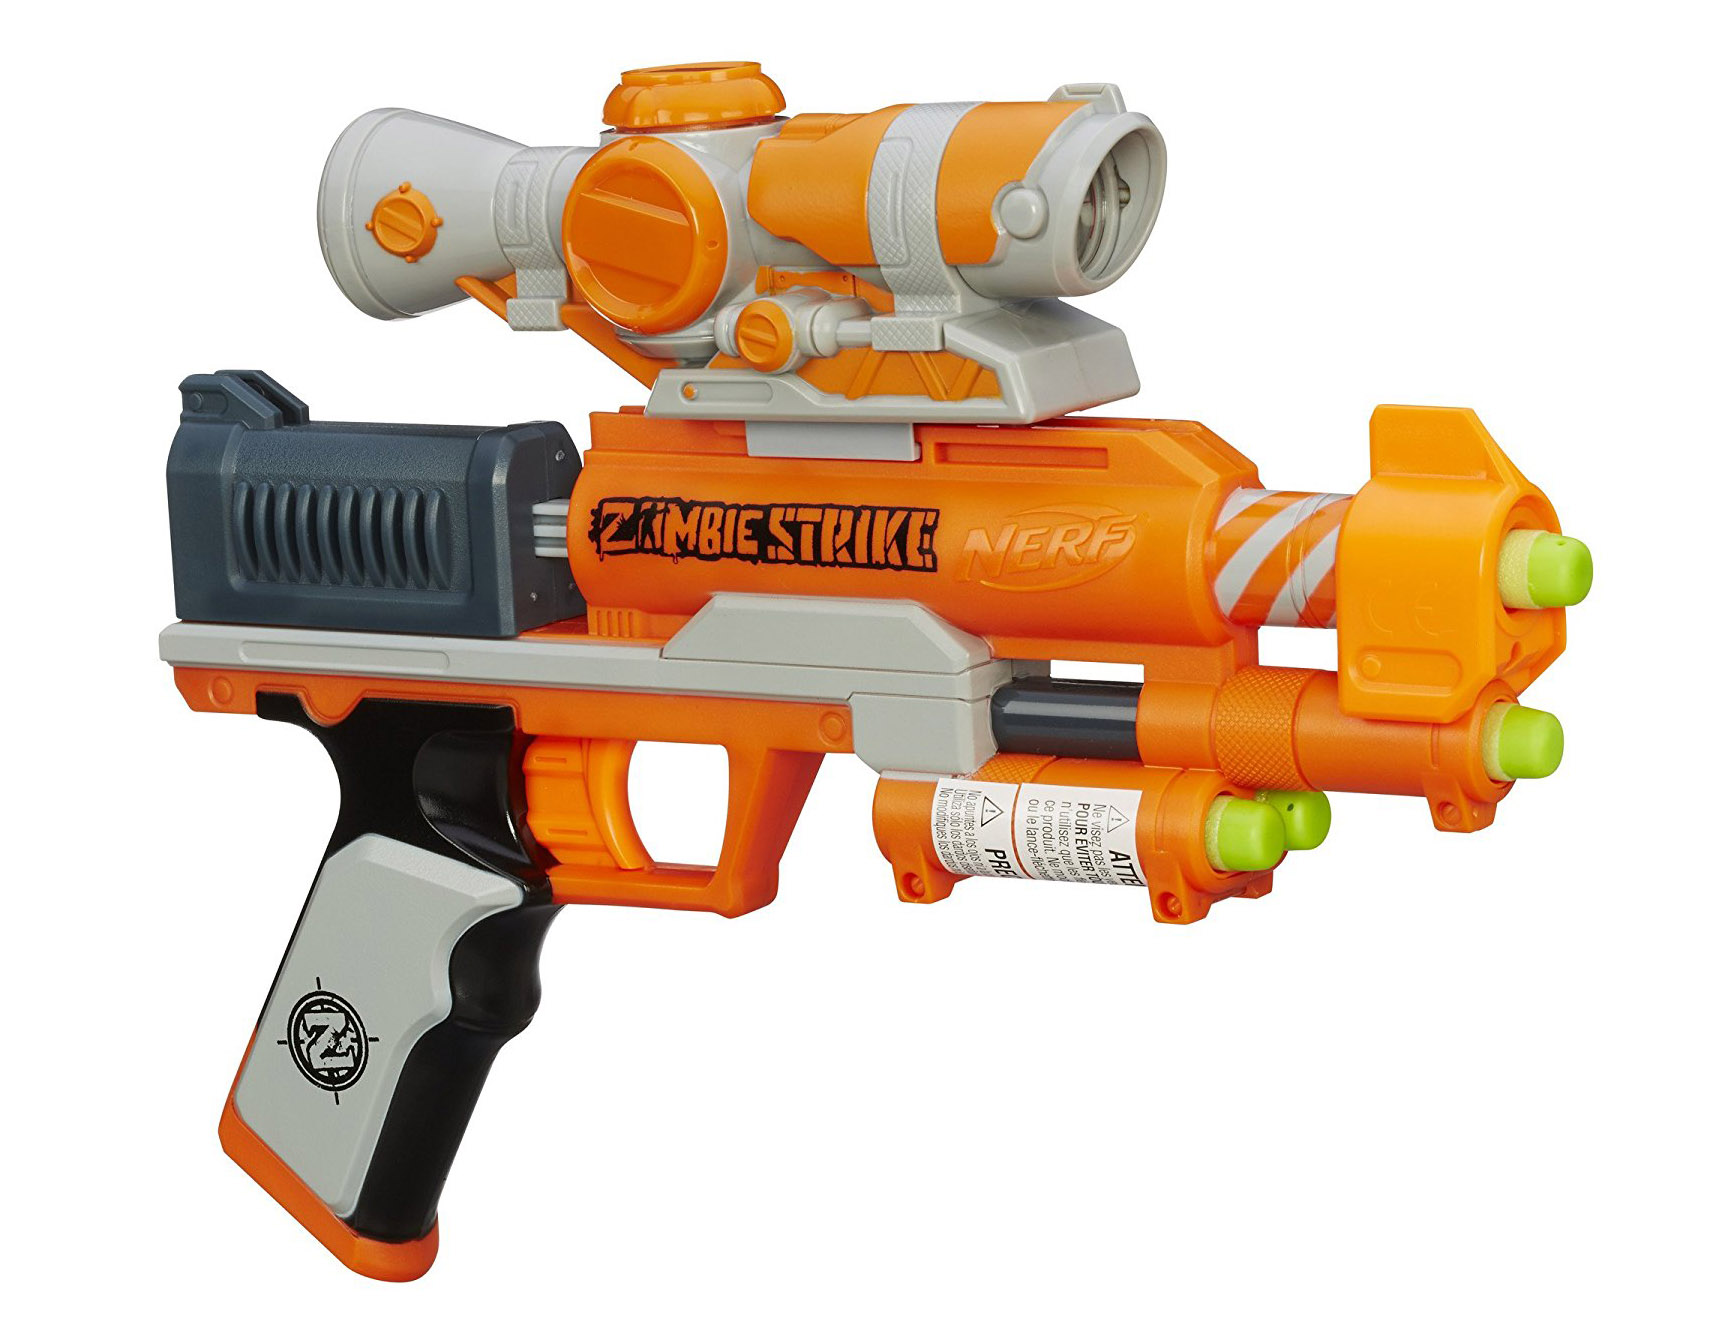 The 15 Best Nerf Guns For Sale Right Now - BroBible